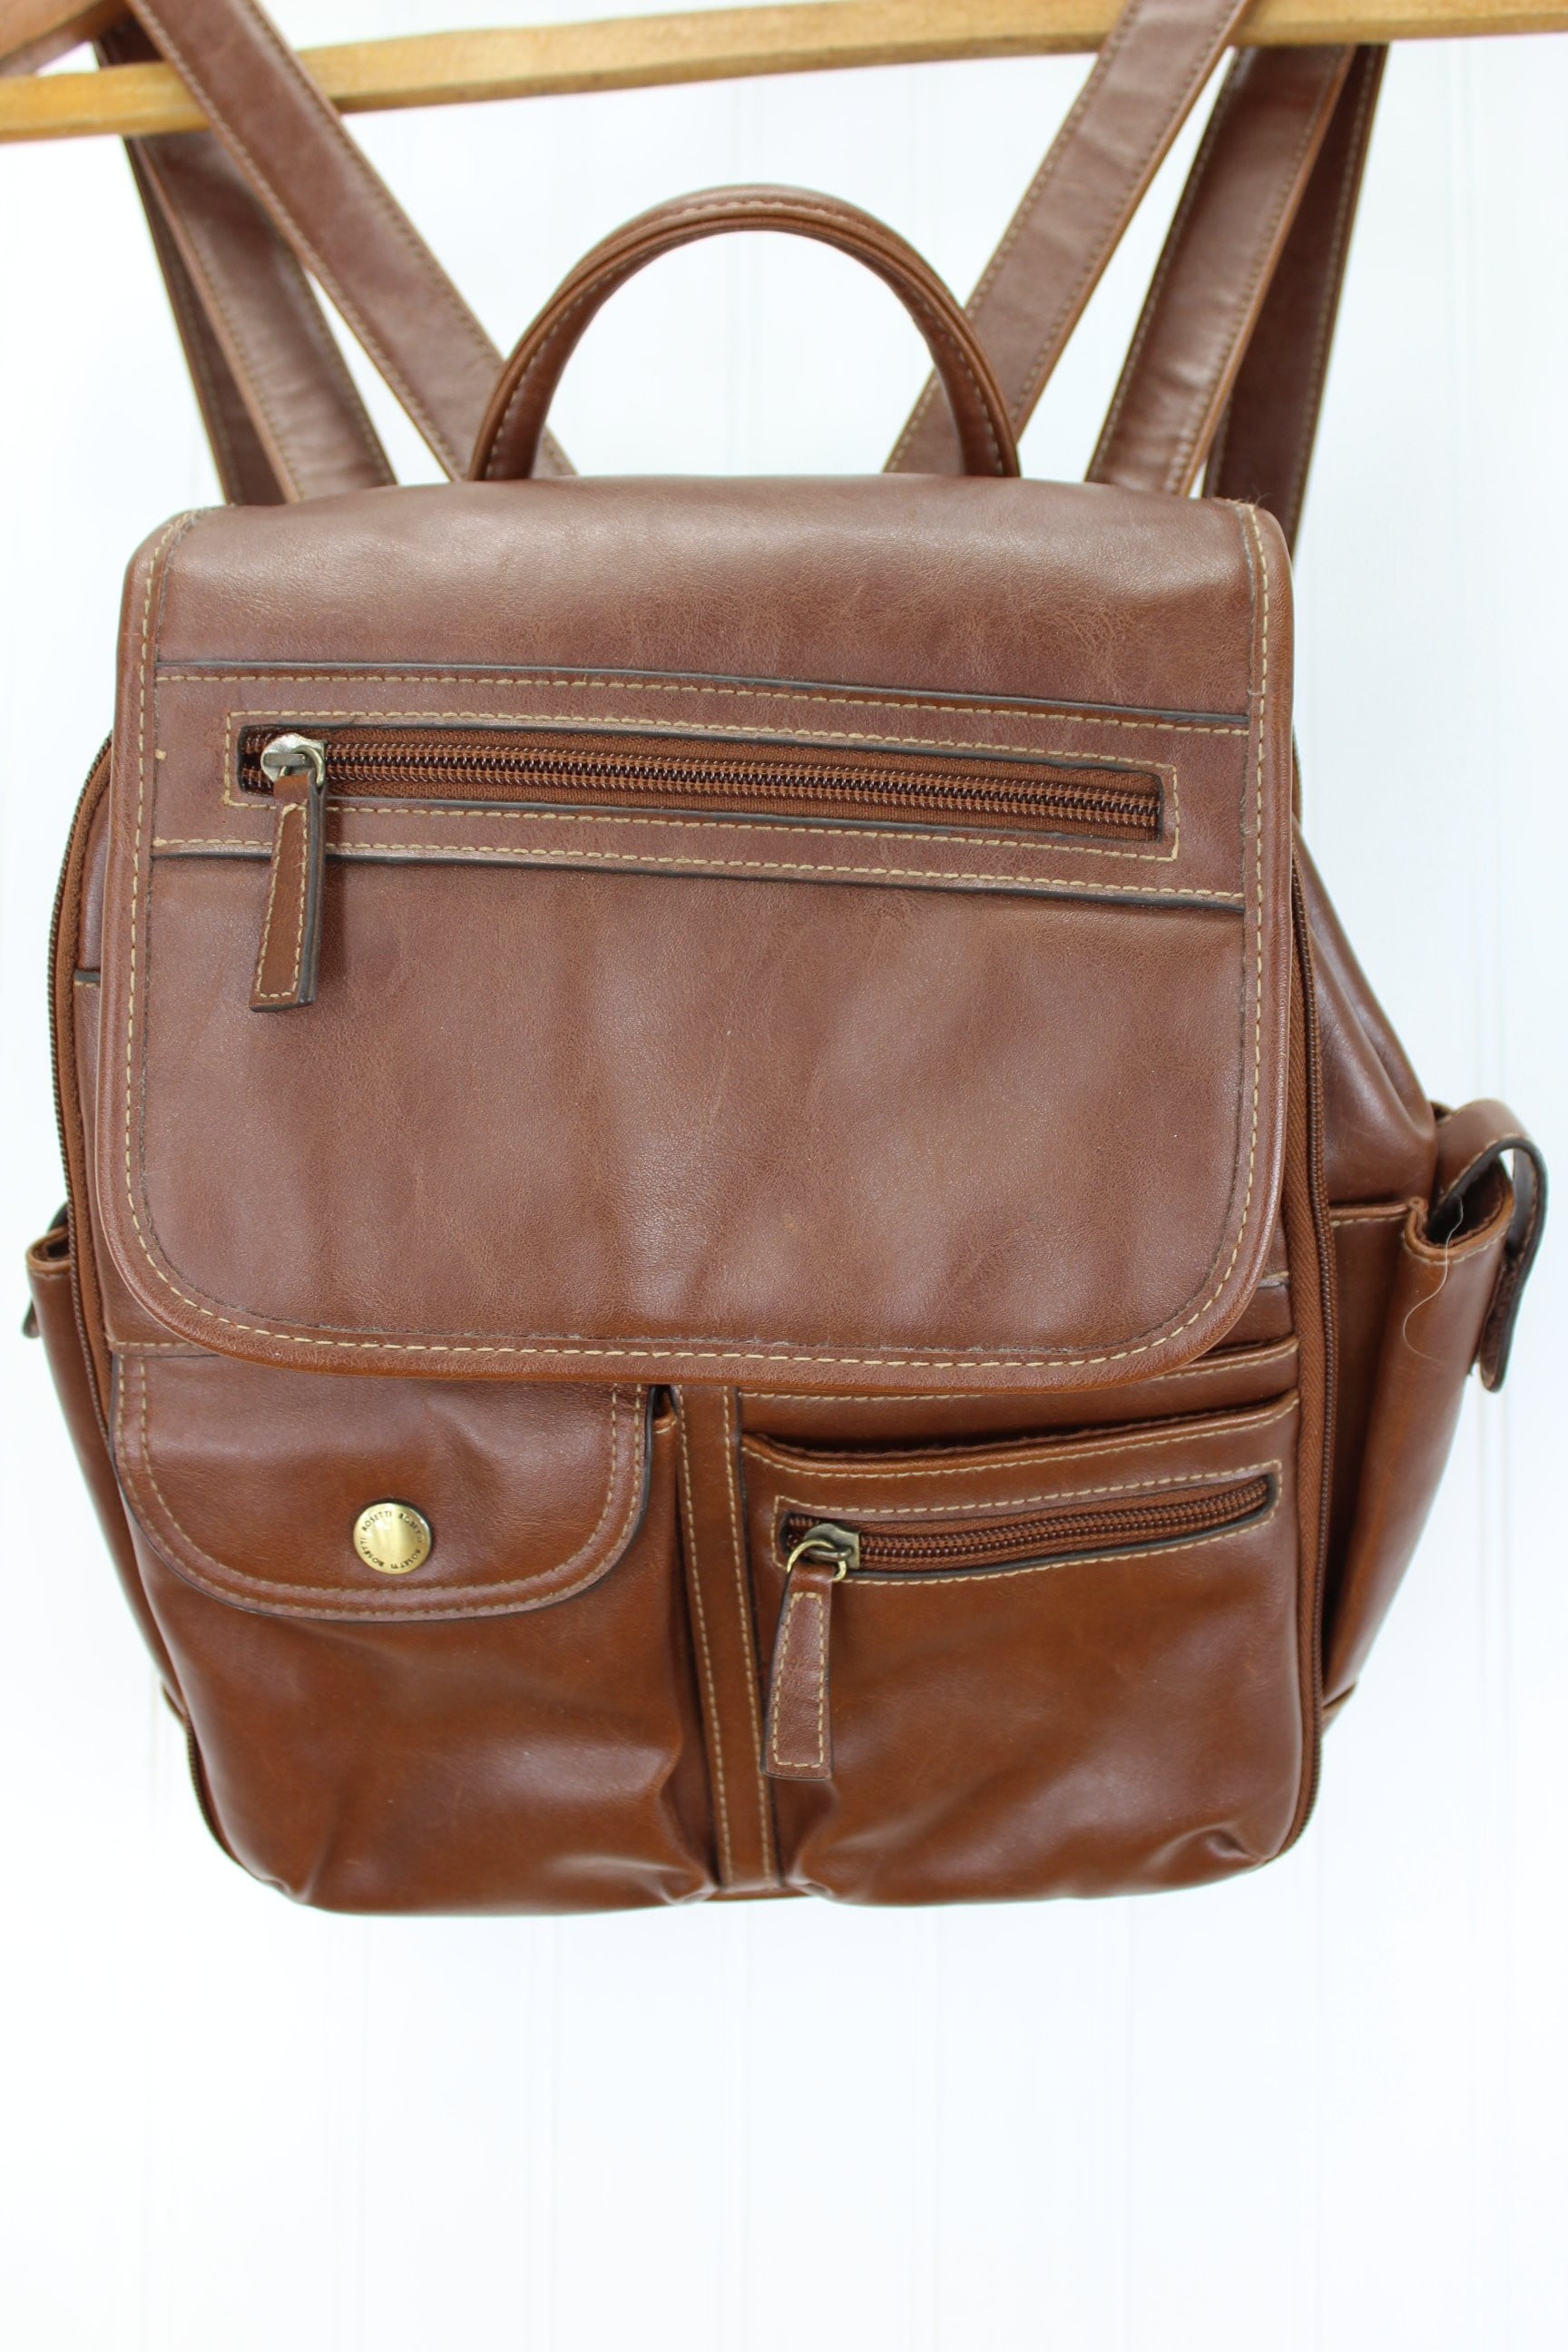 Rosetti Leather Backpack - Brown Double Strap - Compartments Galore lots of space